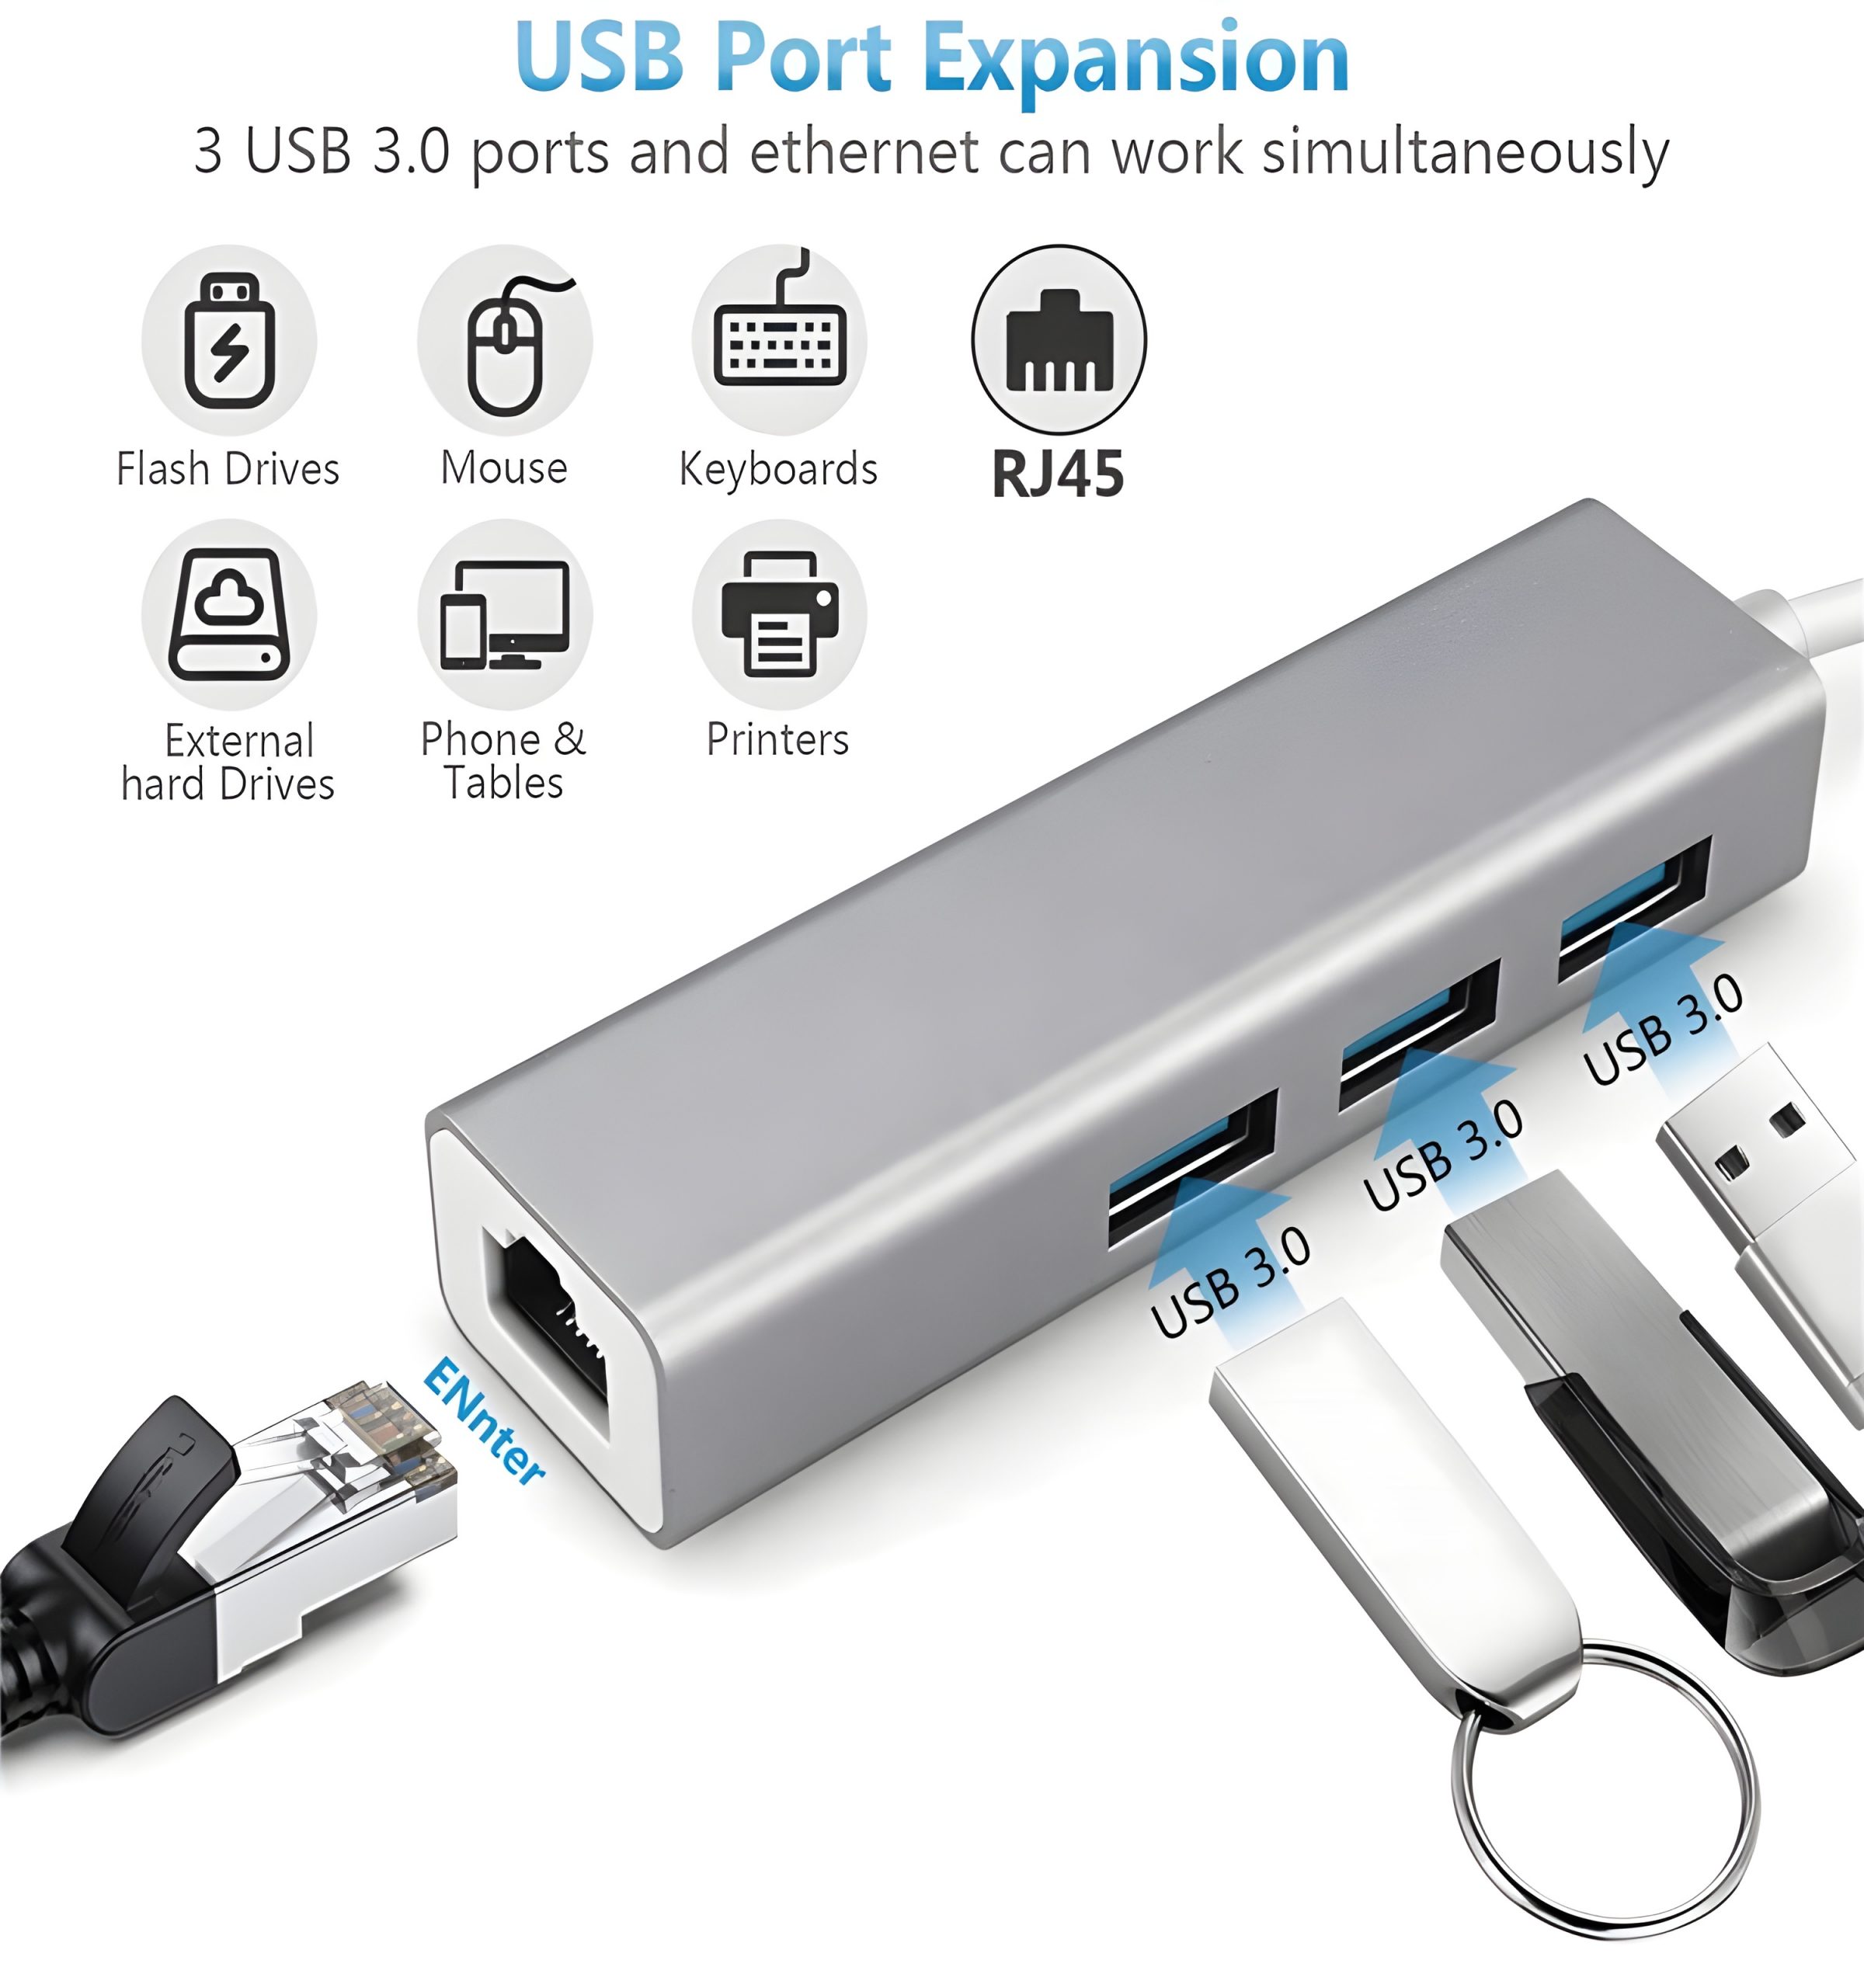 USB 3.1 Type C to Lan Adapter with Gigabit Ethernet Adapter RJ45 10/100/1000Mbps Network Adapter - A's Computers